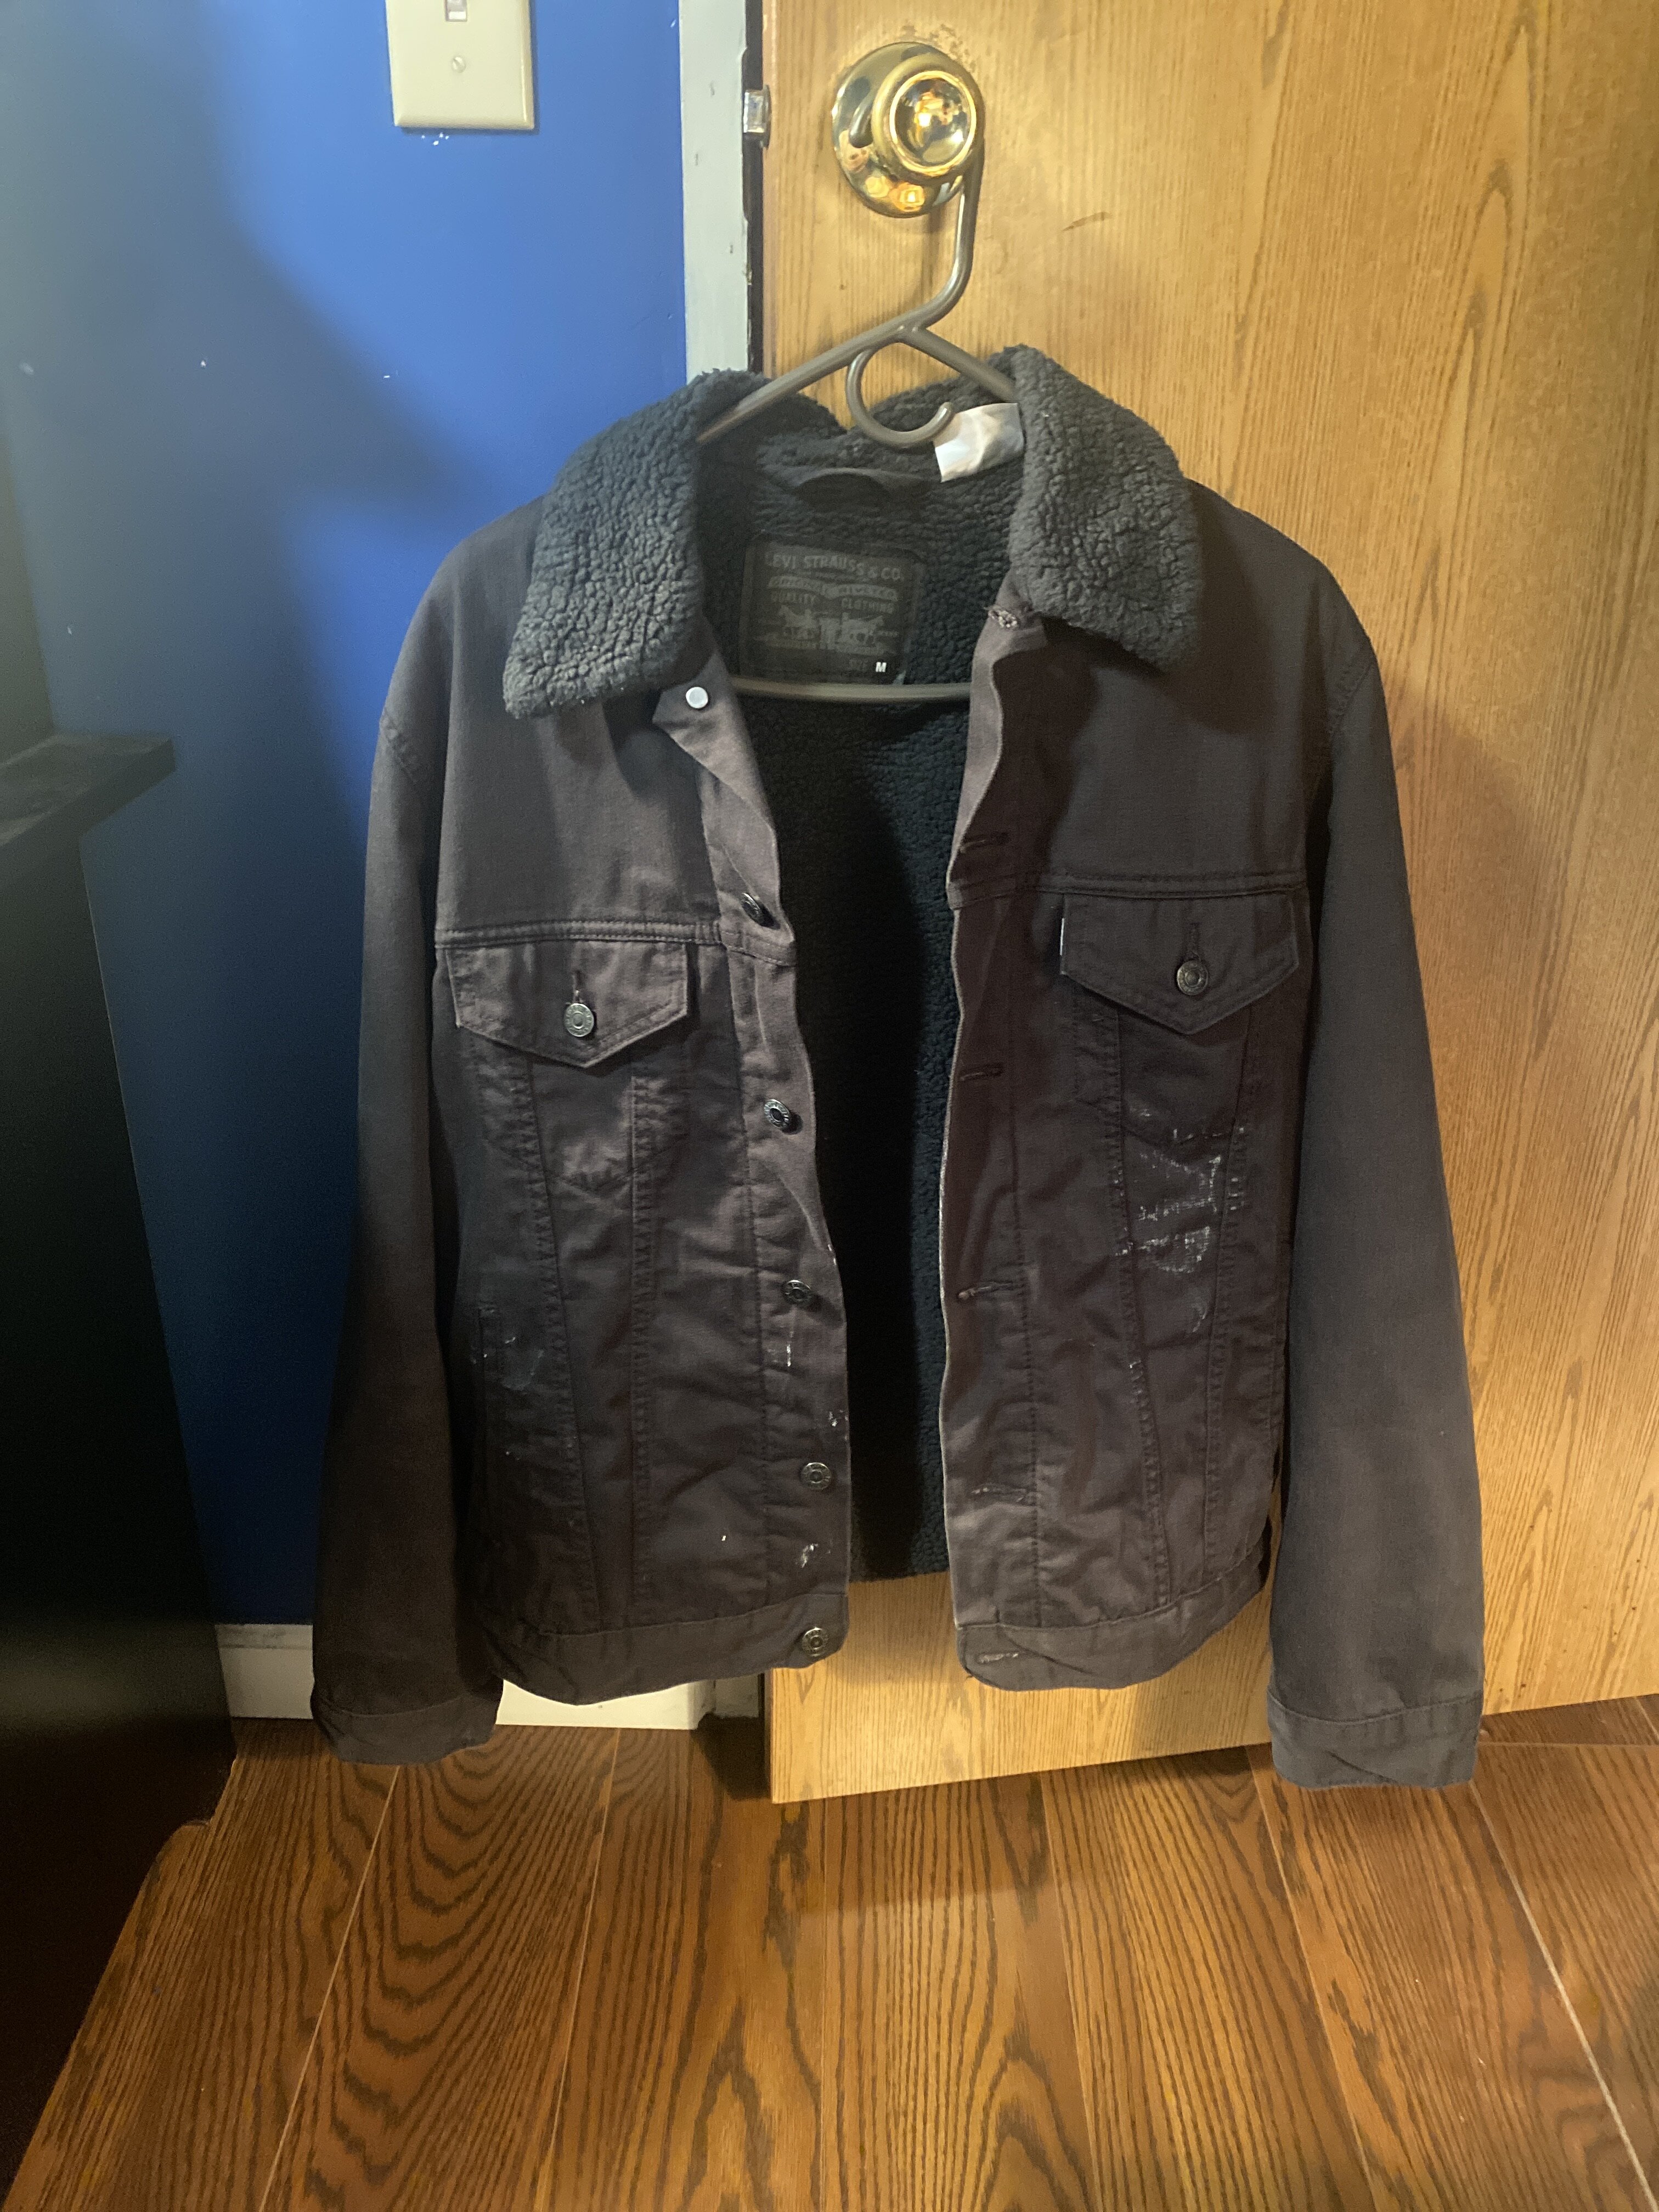 Walking Dead Rick Jacket | Page 70 | RPF Costume and Prop Maker Community